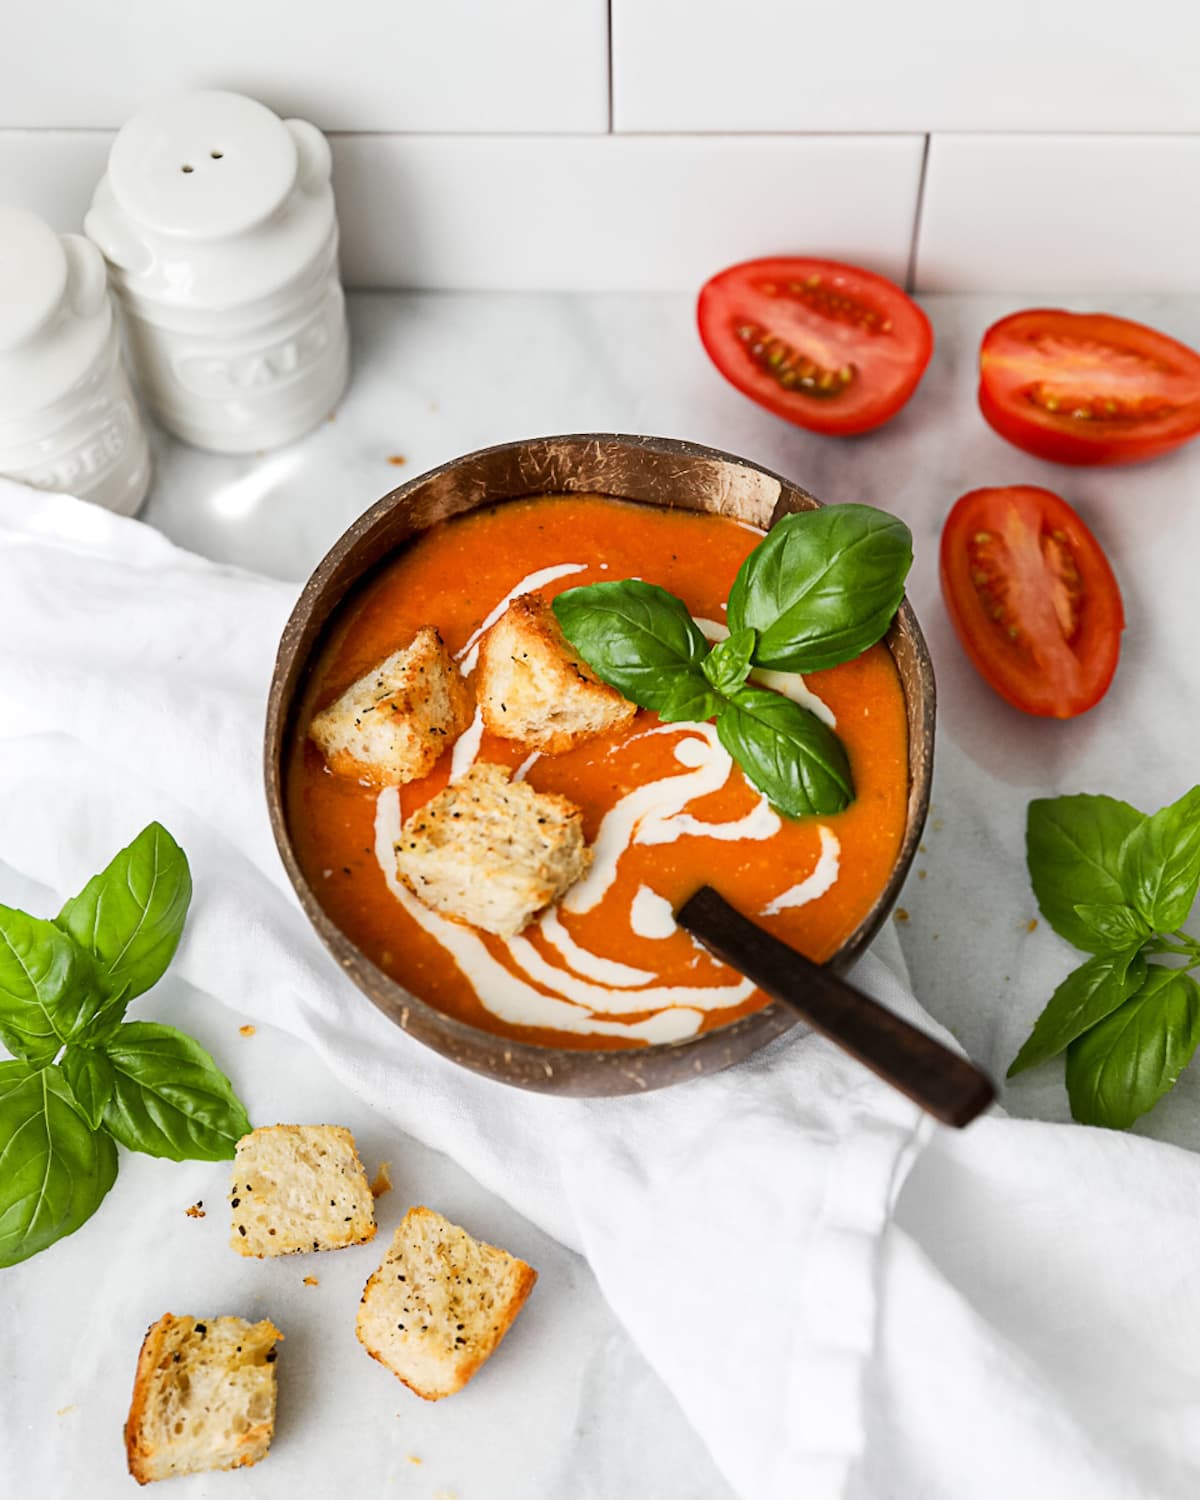 A brown coconut bowl with red soup inside, garnished with vegan cream, three croutons, and fresh basil. There is a wooden spoon inside the soup bowl.